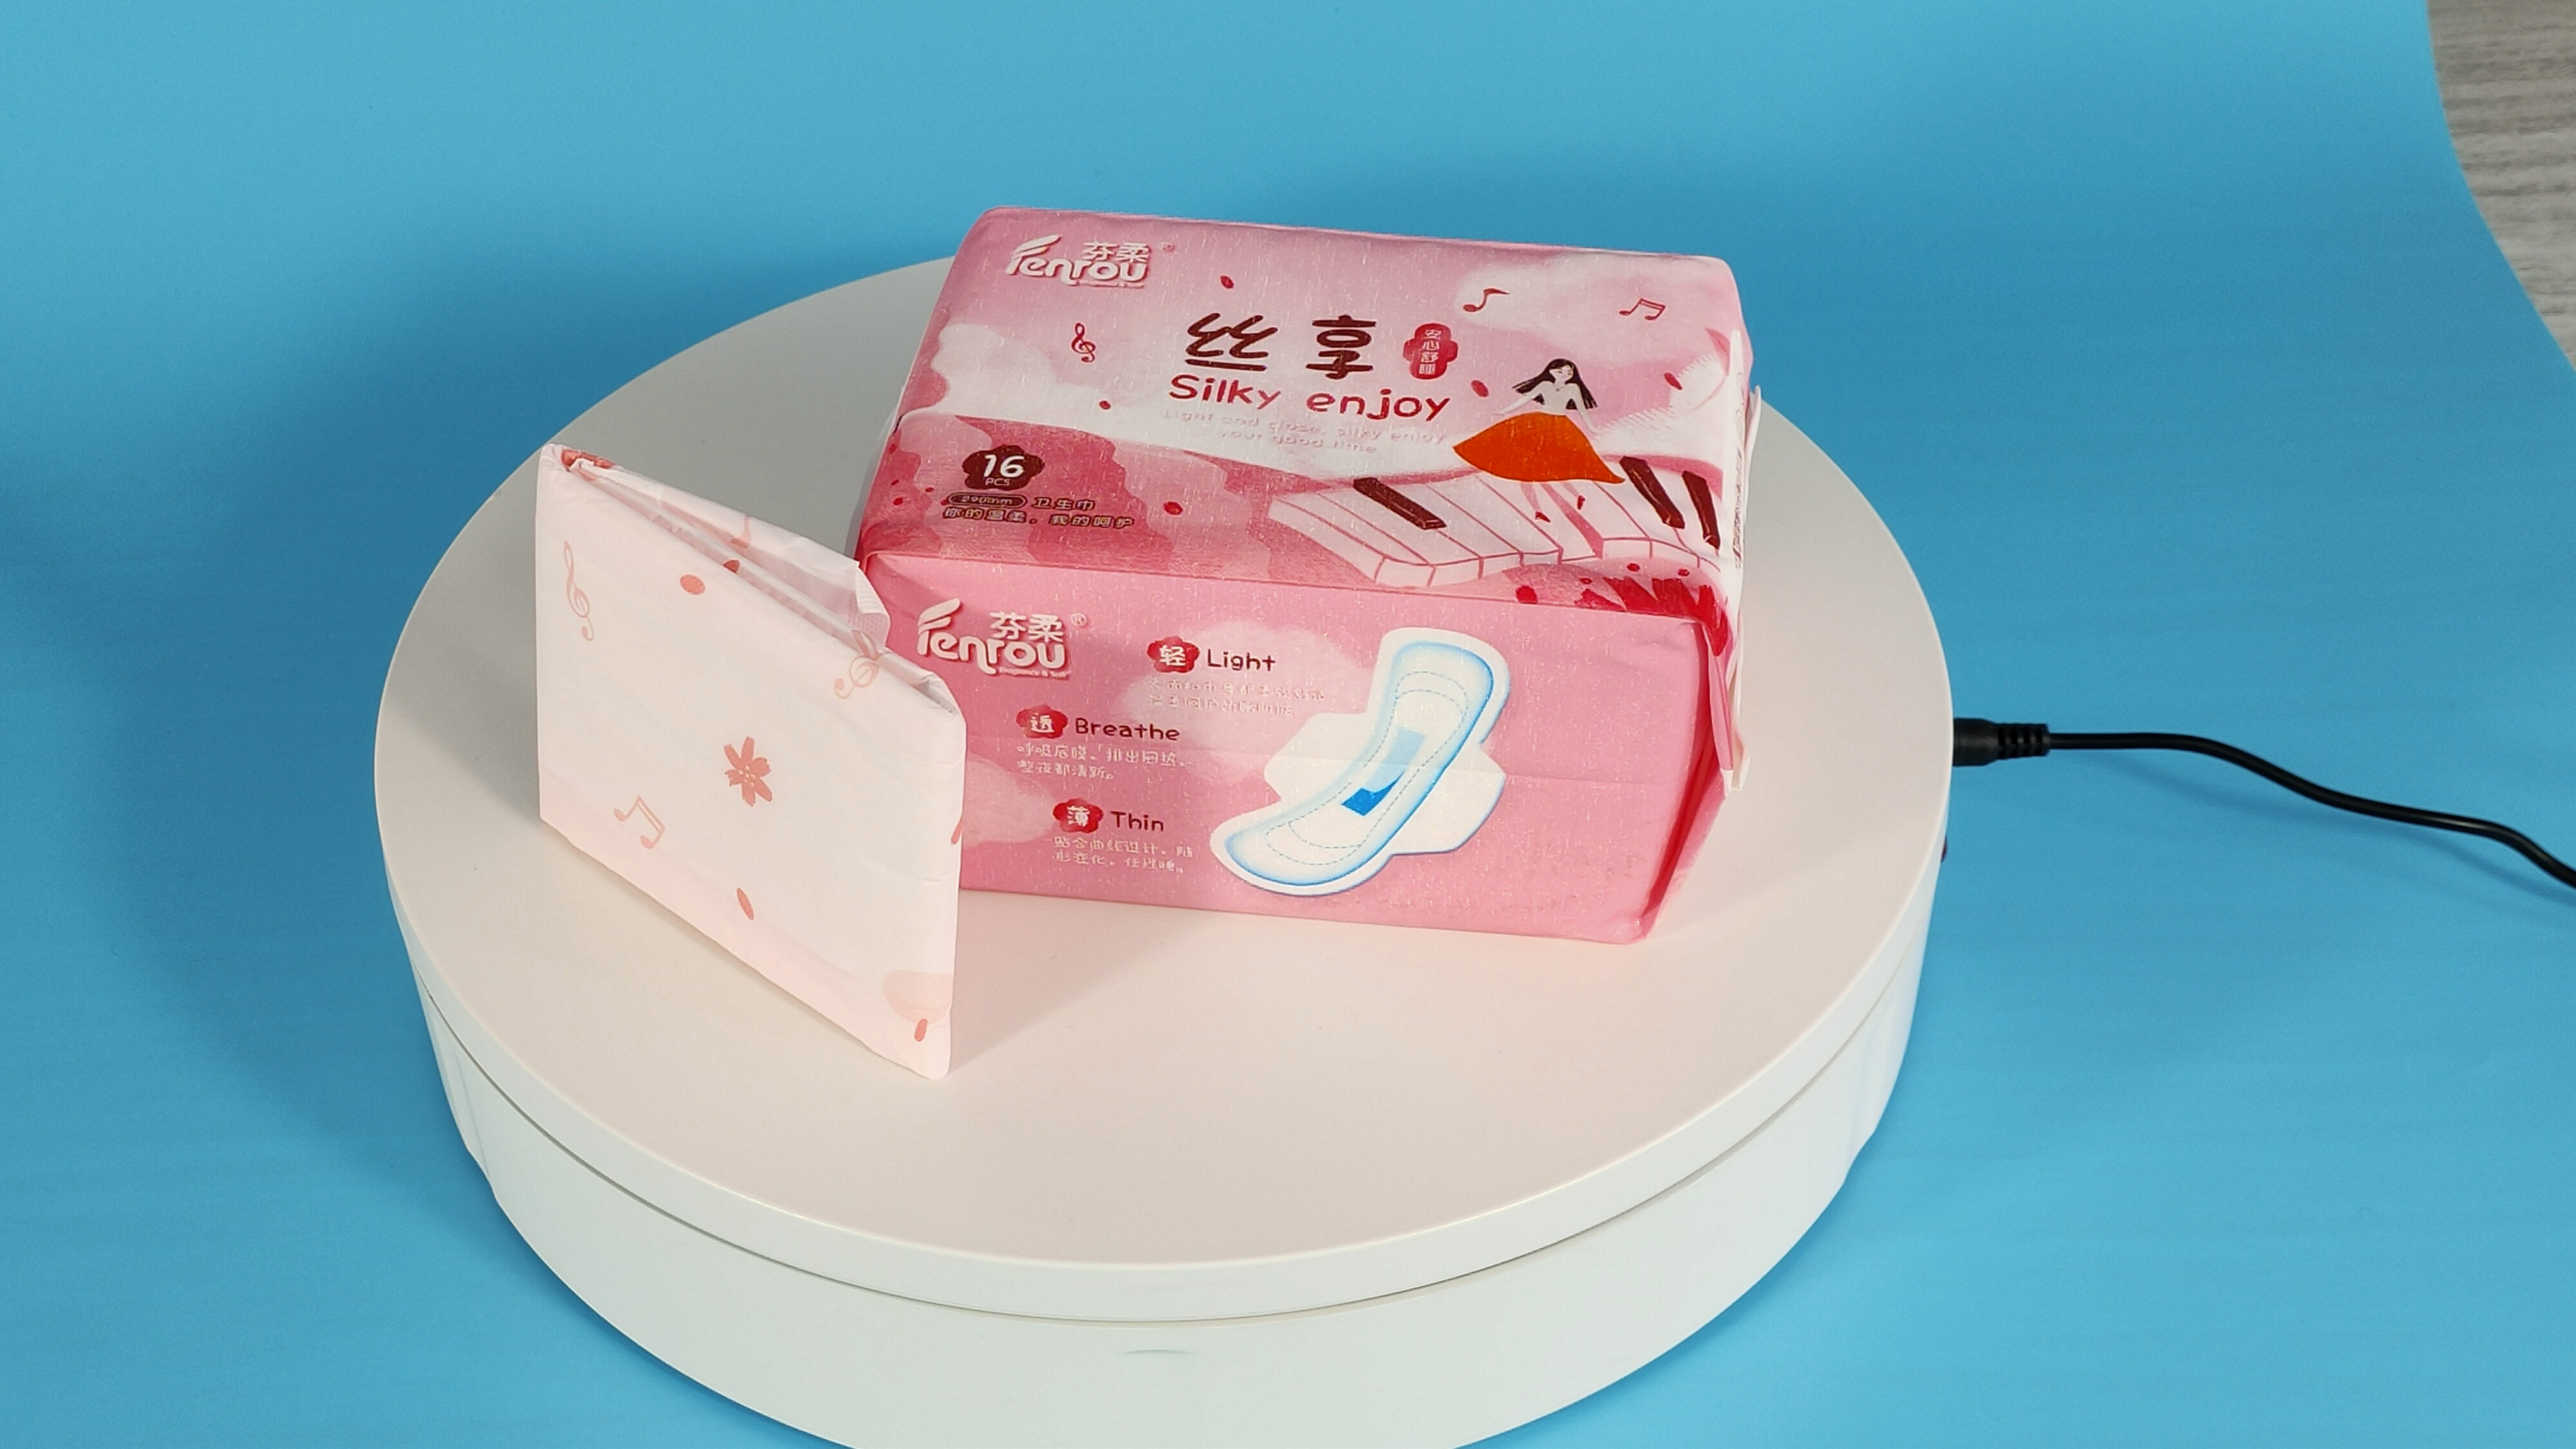 280mm Free Sample Sanitary Napkin with Anion Chip Maxi Sanitary Pads Featured Image